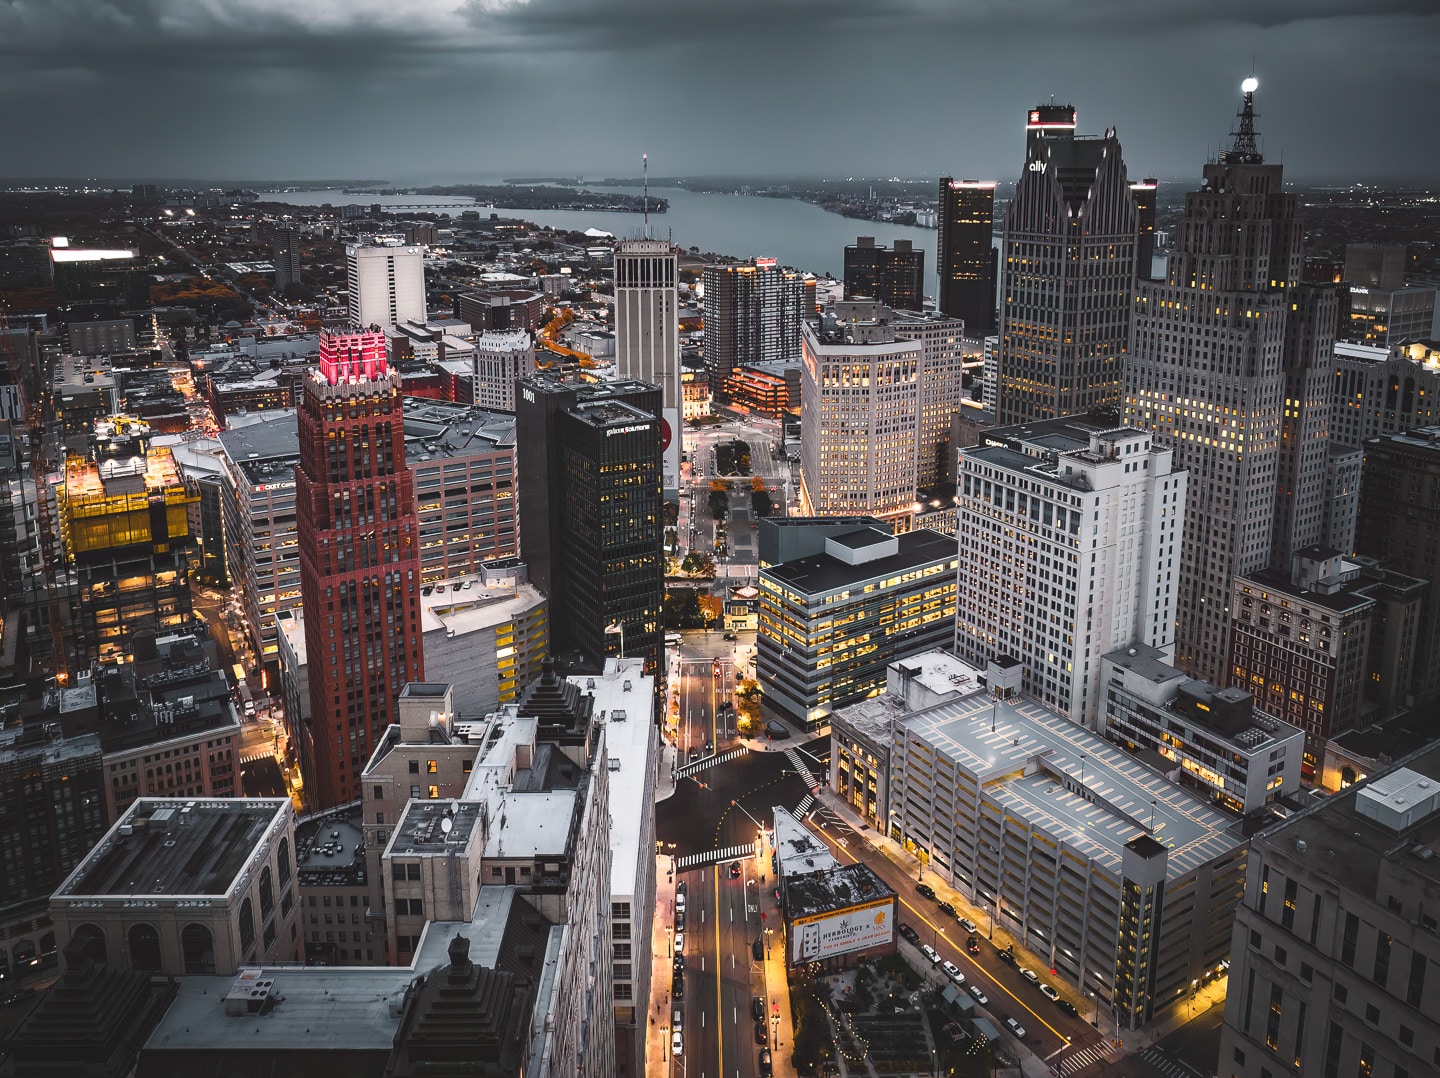 Aerial view of downtown Detroit, MI on an overcast evening